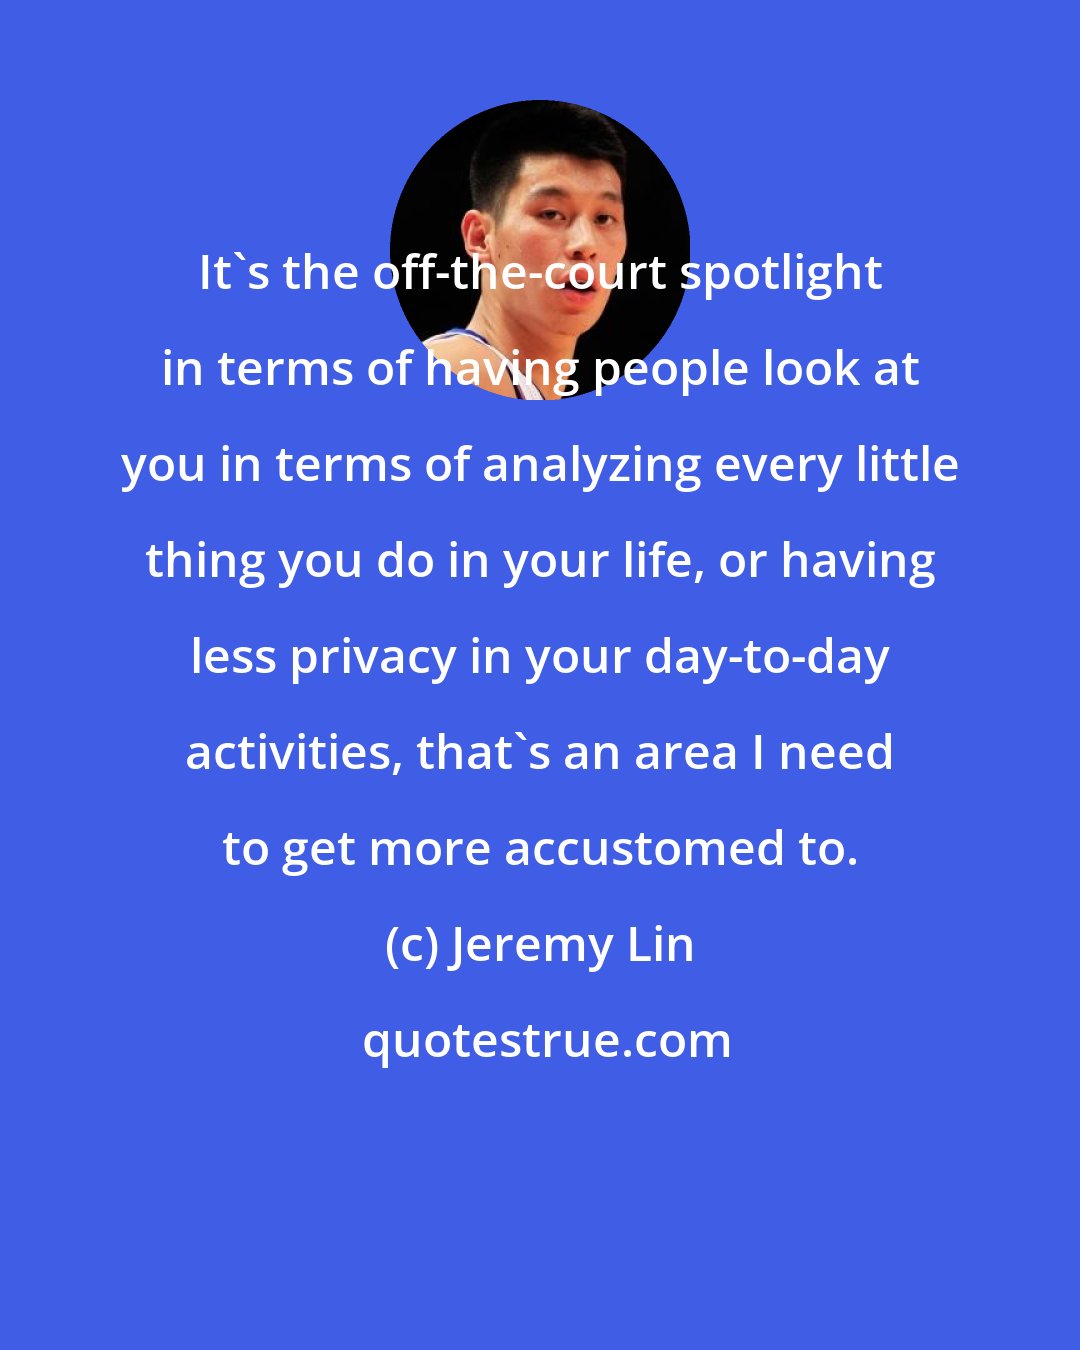 Jeremy Lin: It's the off-the-court spotlight in terms of having people look at you in terms of analyzing every little thing you do in your life, or having less privacy in your day-to-day activities, that's an area I need to get more accustomed to.